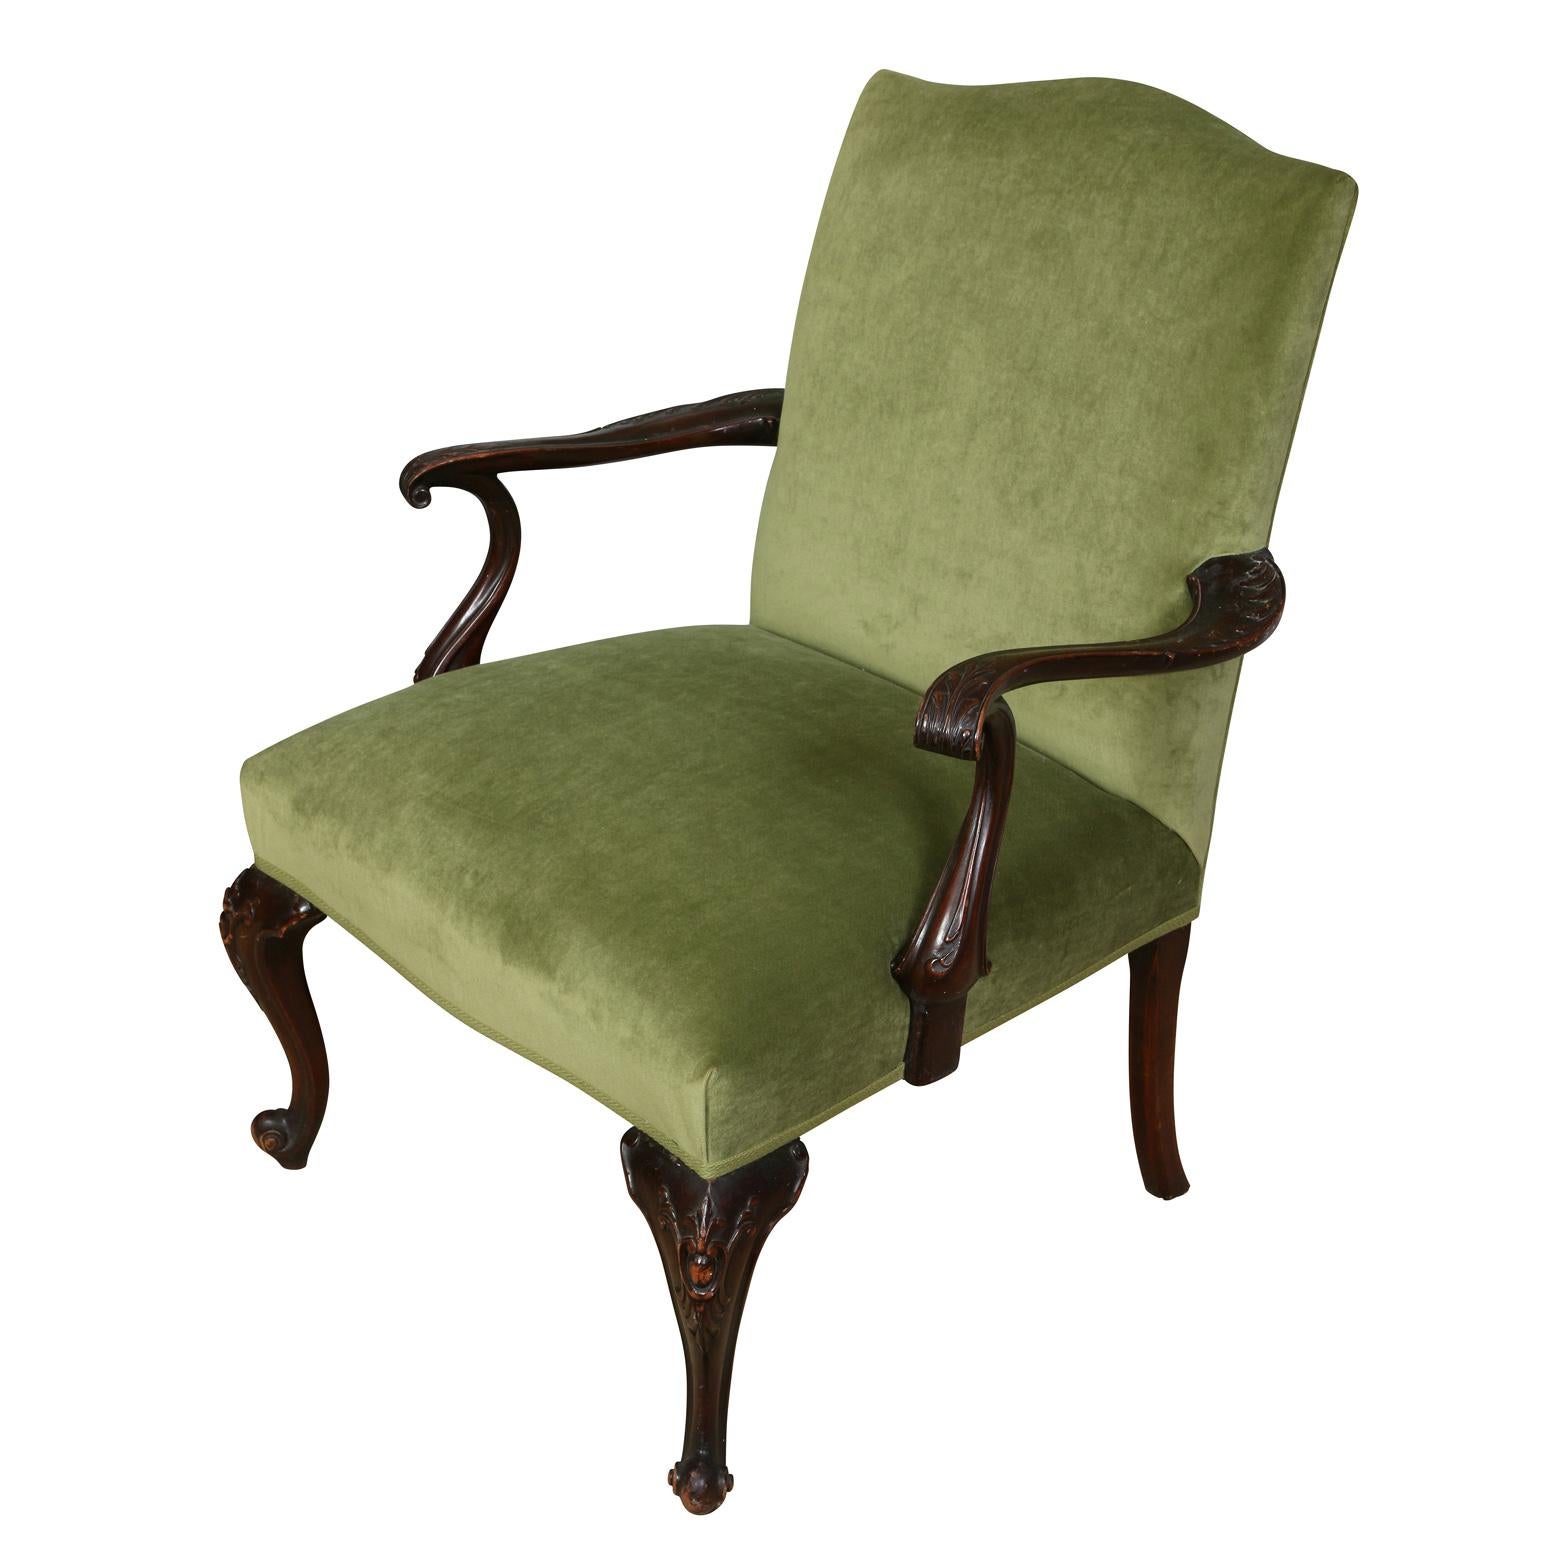 A vintage Chippendale style chair newly upholstered in rich green velvet with detailed carved and curved scroll arms and cabriole legs.